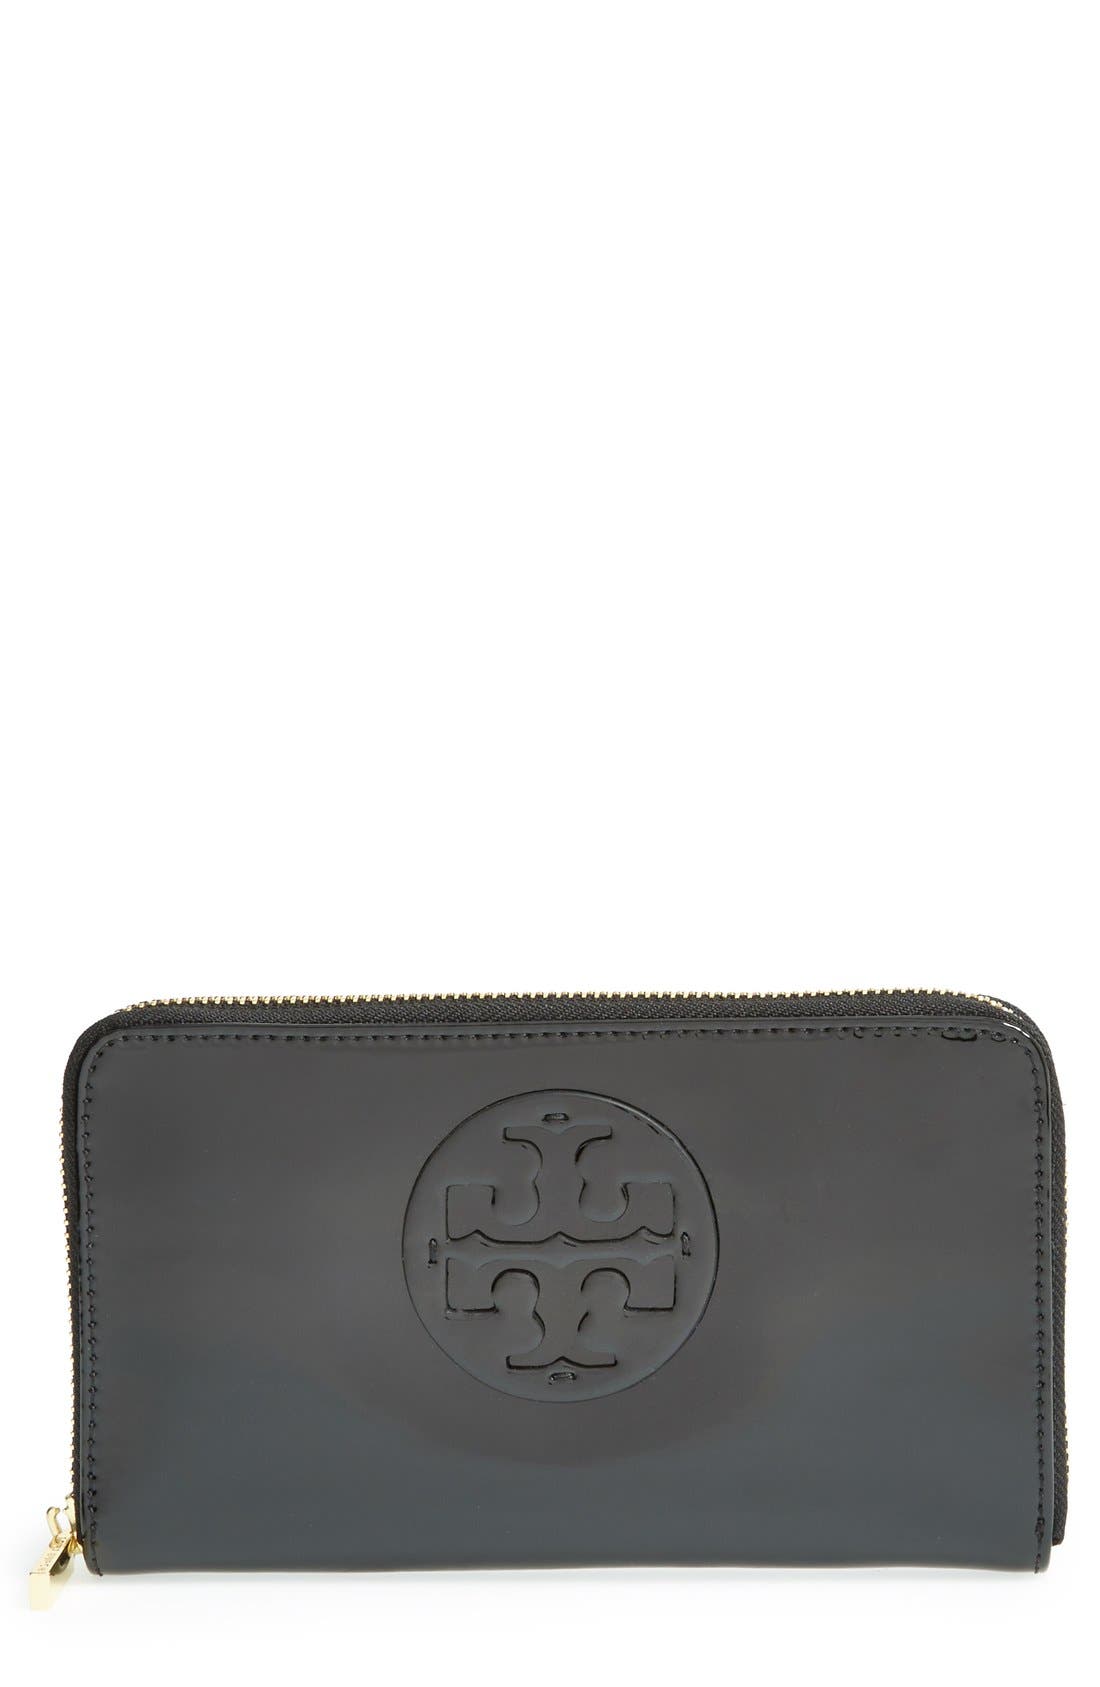 tory burch patent leather